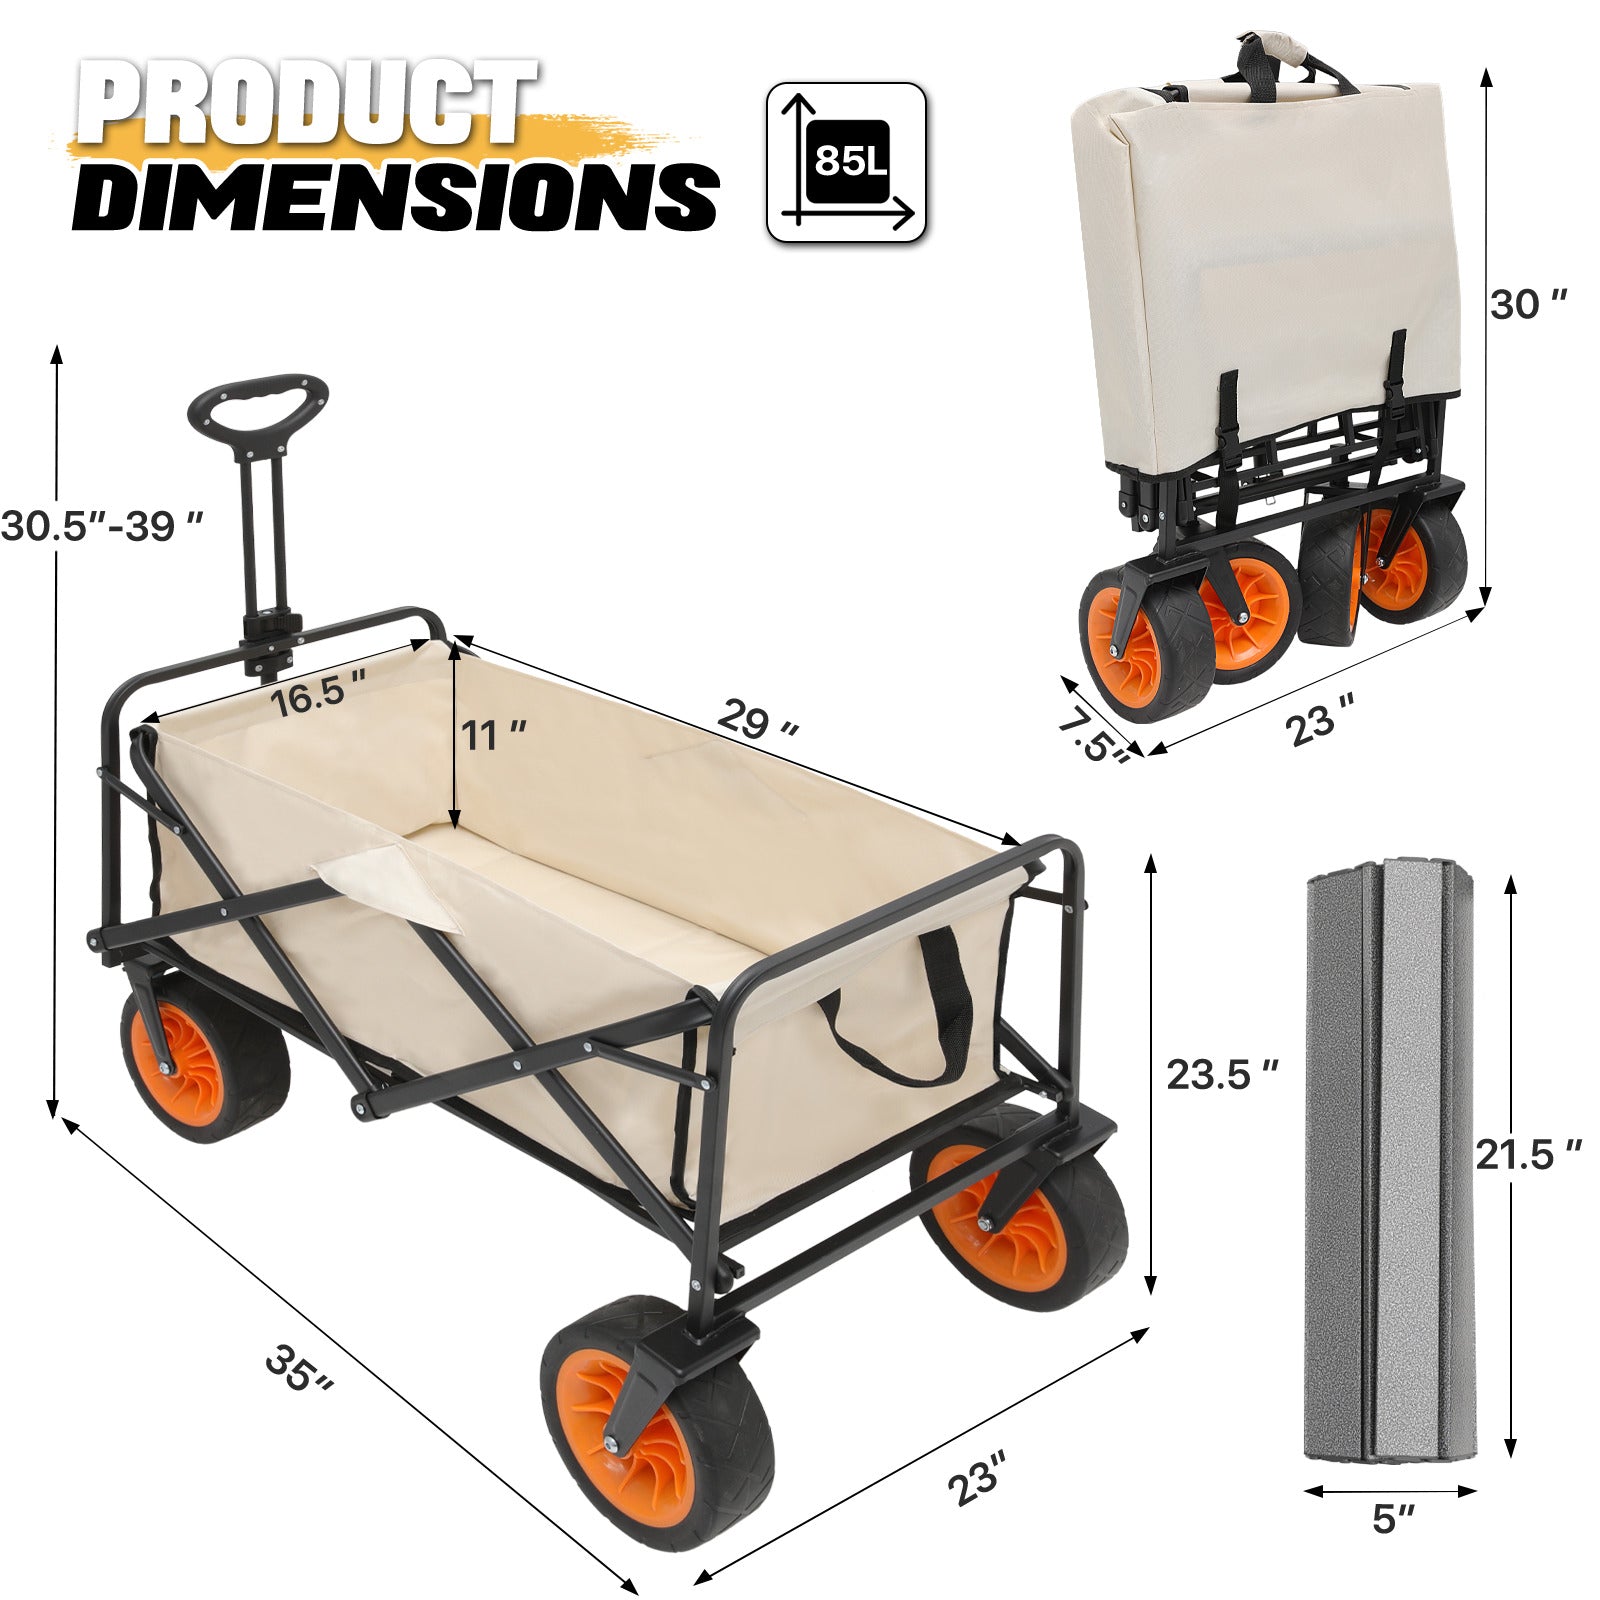 Camping Wagon Cart with Folding Table - 85L Capacity